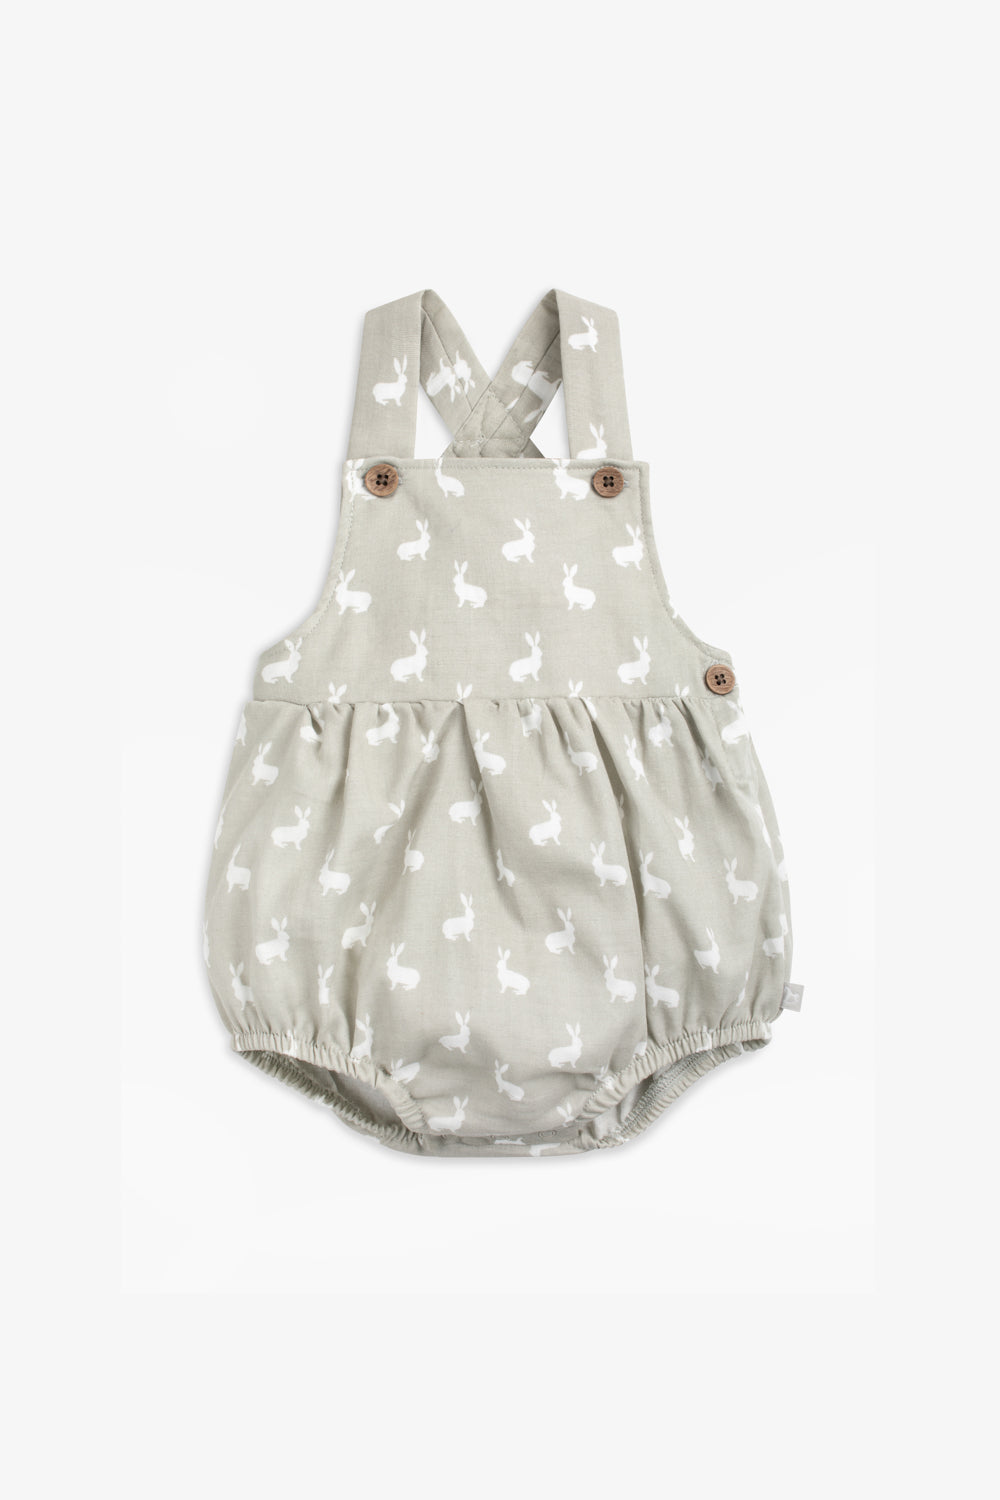 Cotton Shorty Dungaree/Body, fawn hare print